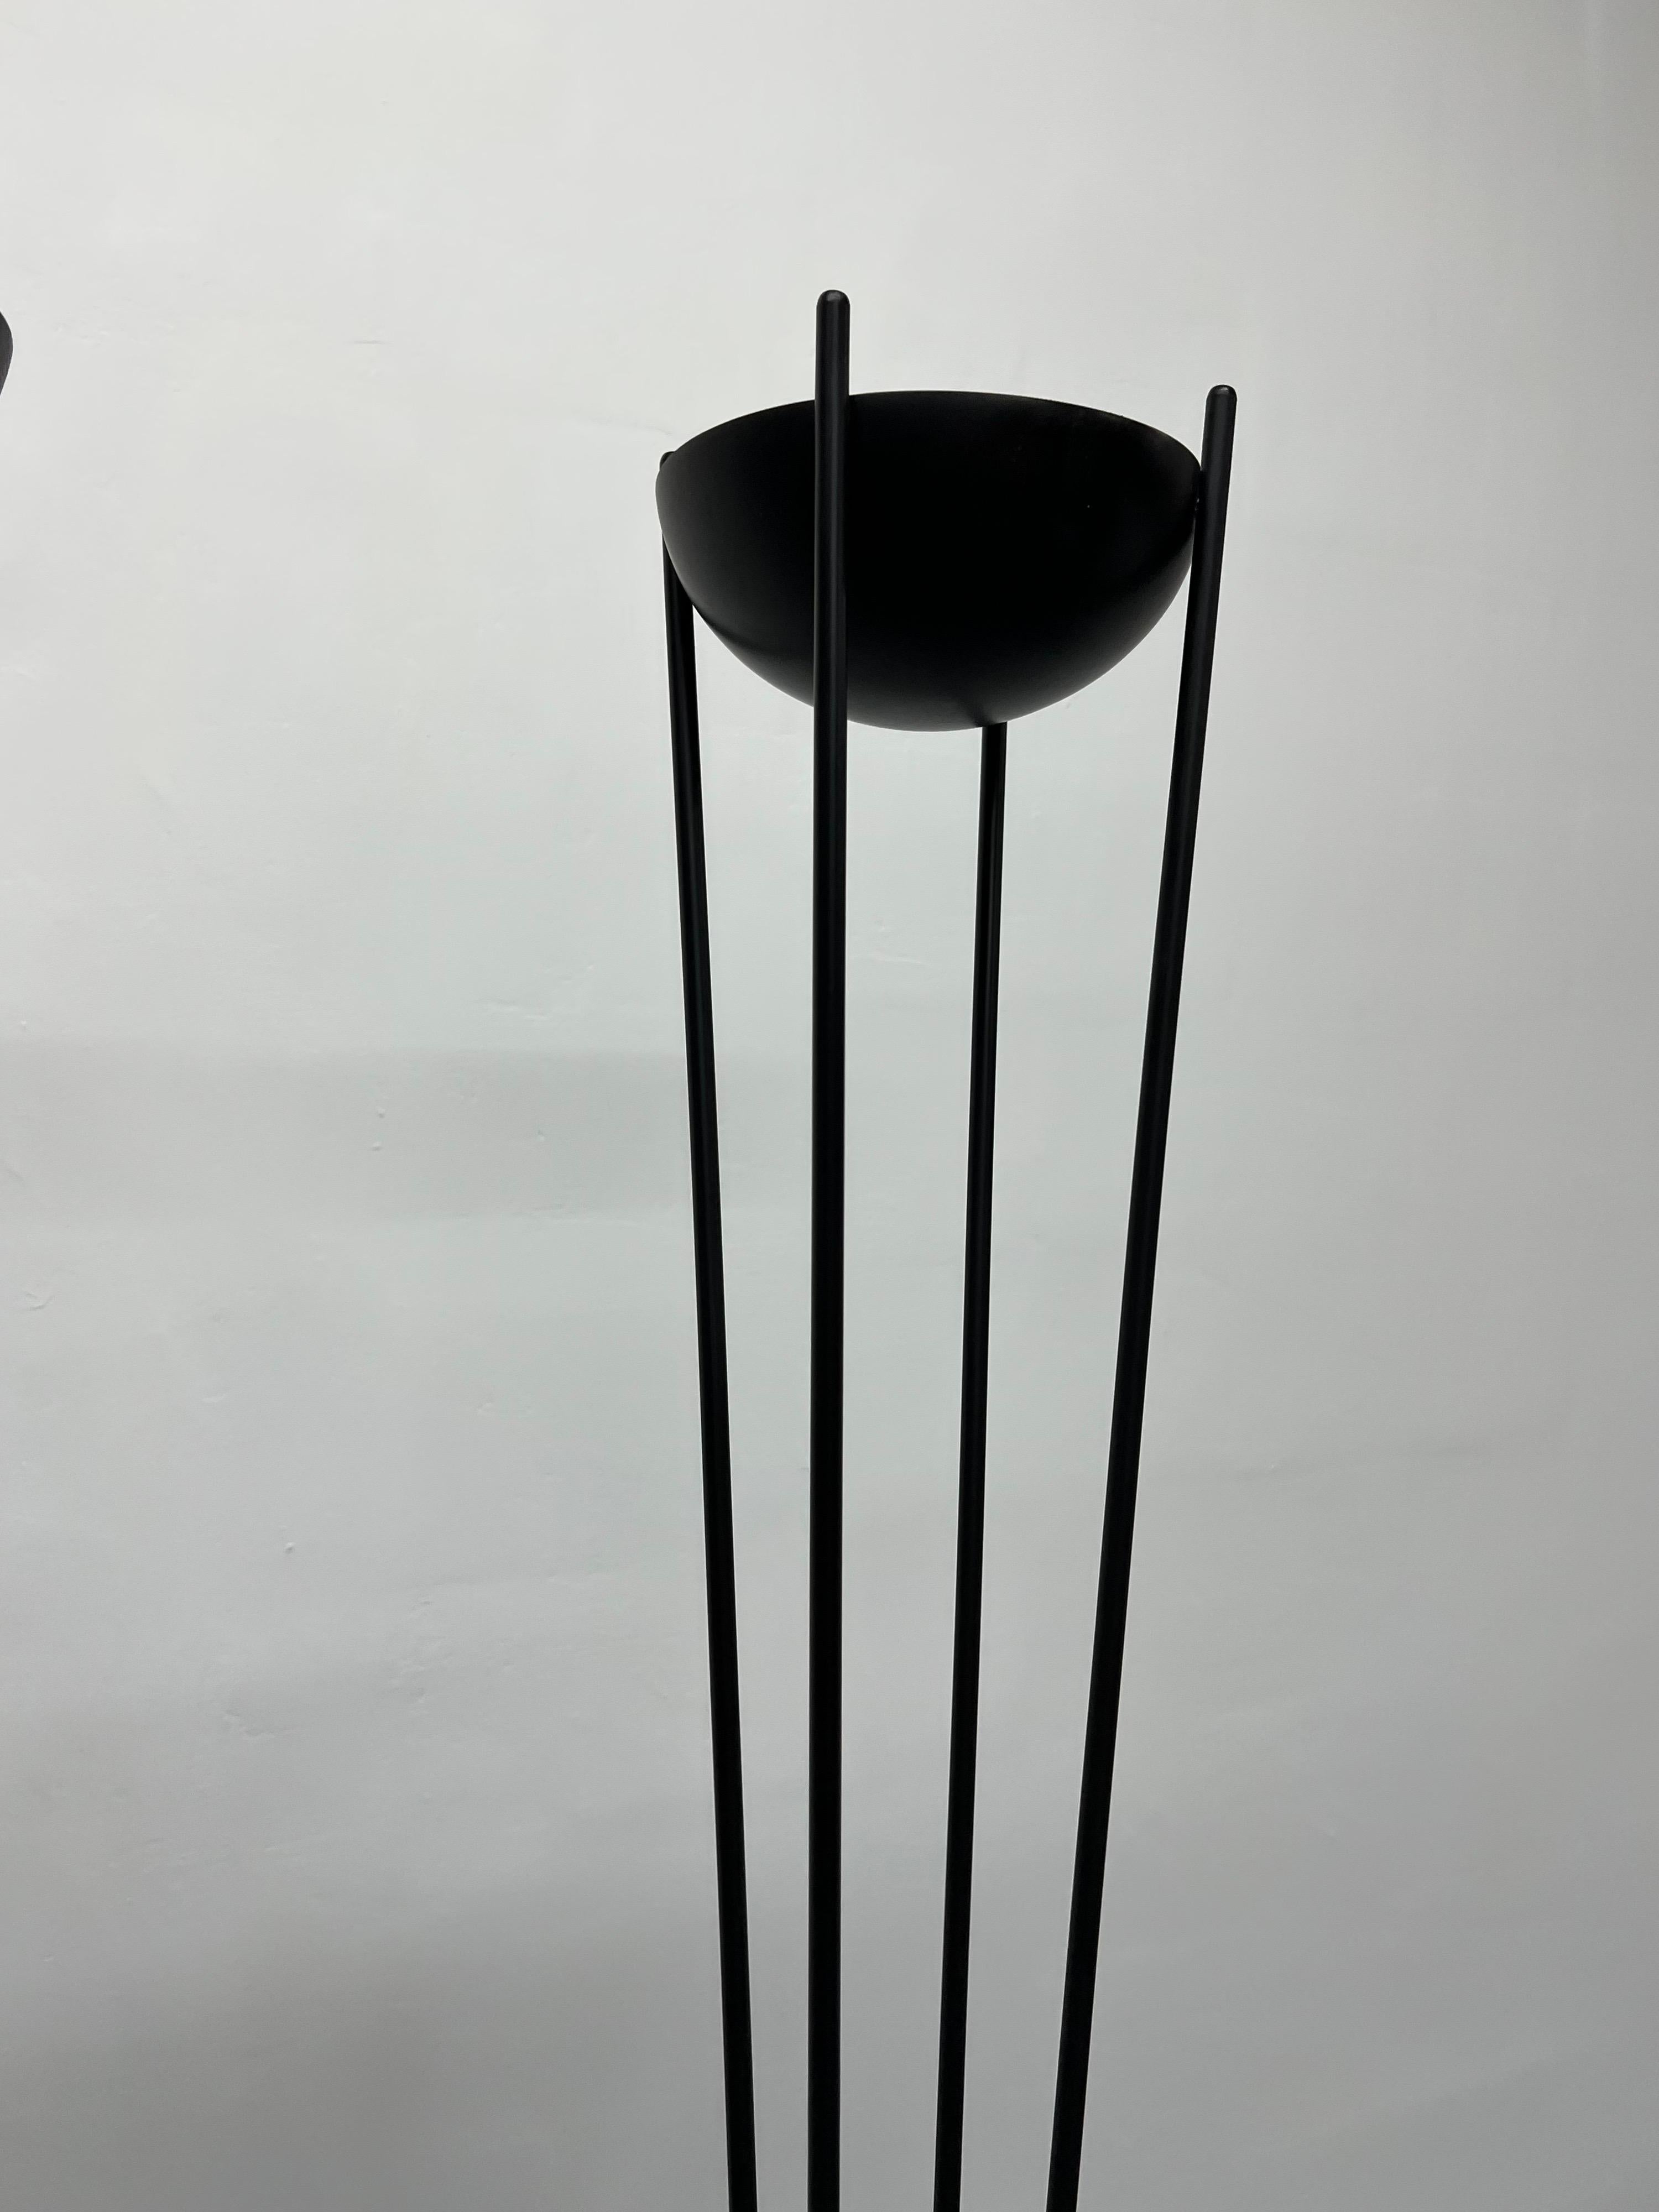 Postmodern Koch & Lowy Matte Black Torchiere Floor Lamps, 1980s, a Pair For Sale 1